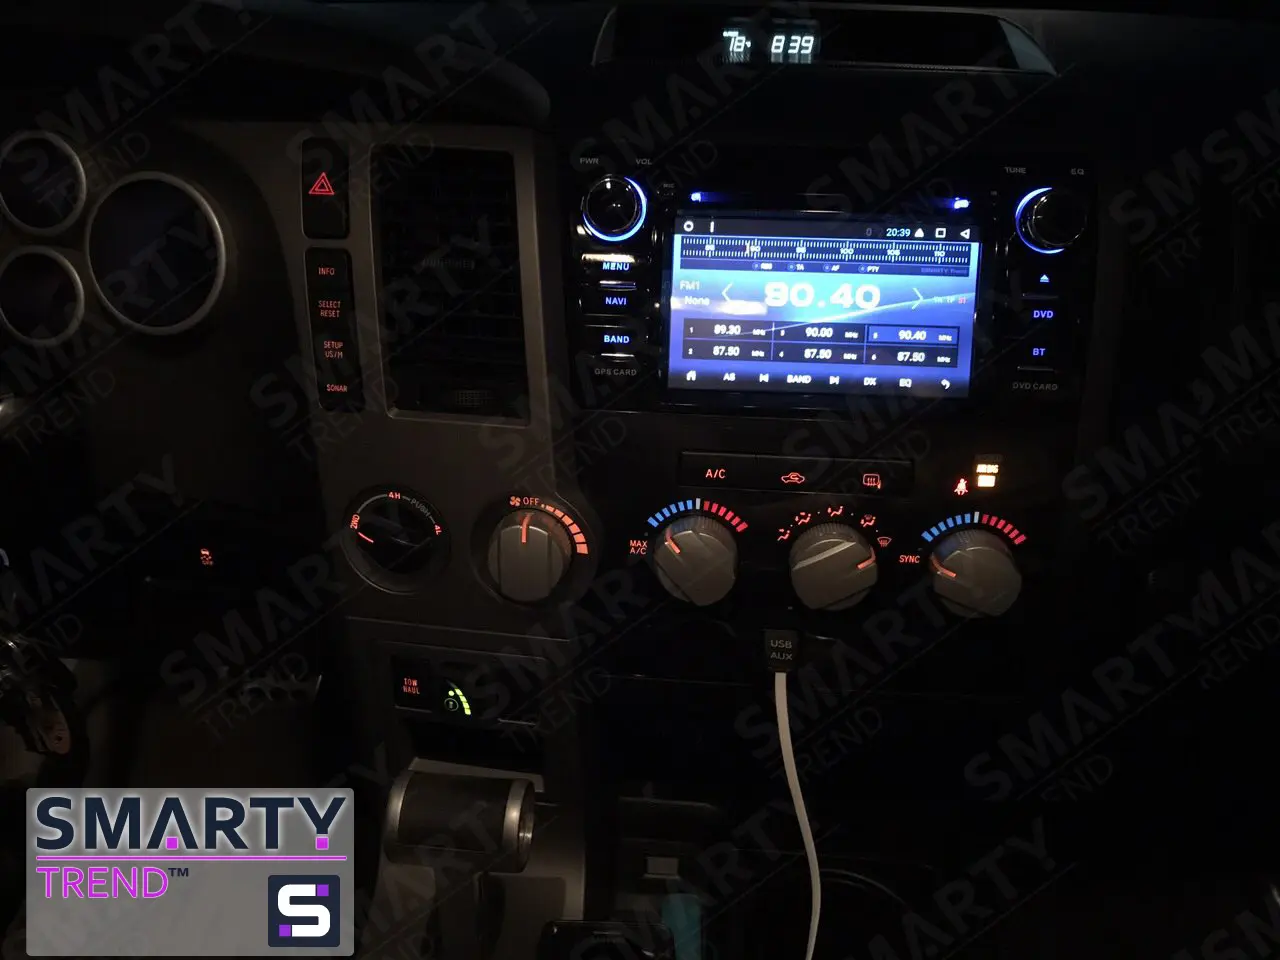 The SMARTY Trend head unit for Toyota Sequoia 